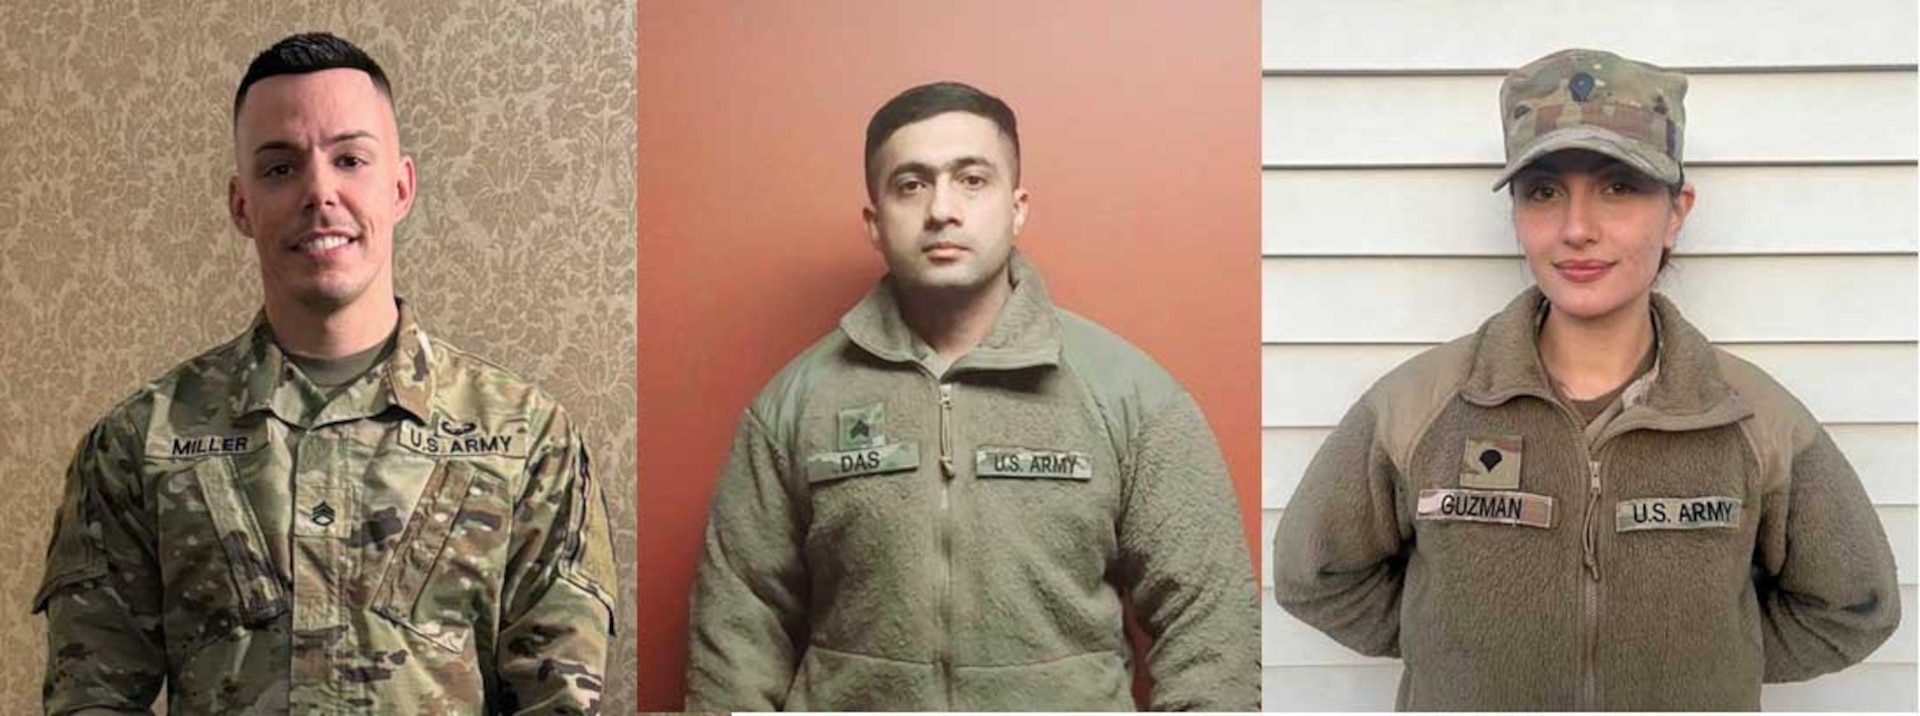 Three New York Army National Guard Soldiers who were on duty at a hotel being used as a migrant shelter in Long Island City, New York, helped apprehend a suspected arsonist and put out the fire he started Jan. 29, 2024. Pictured are, from left, Staff Sgt. Richard Miller, Sgt. Animesh Das, Spc. Jaslin Guzman.